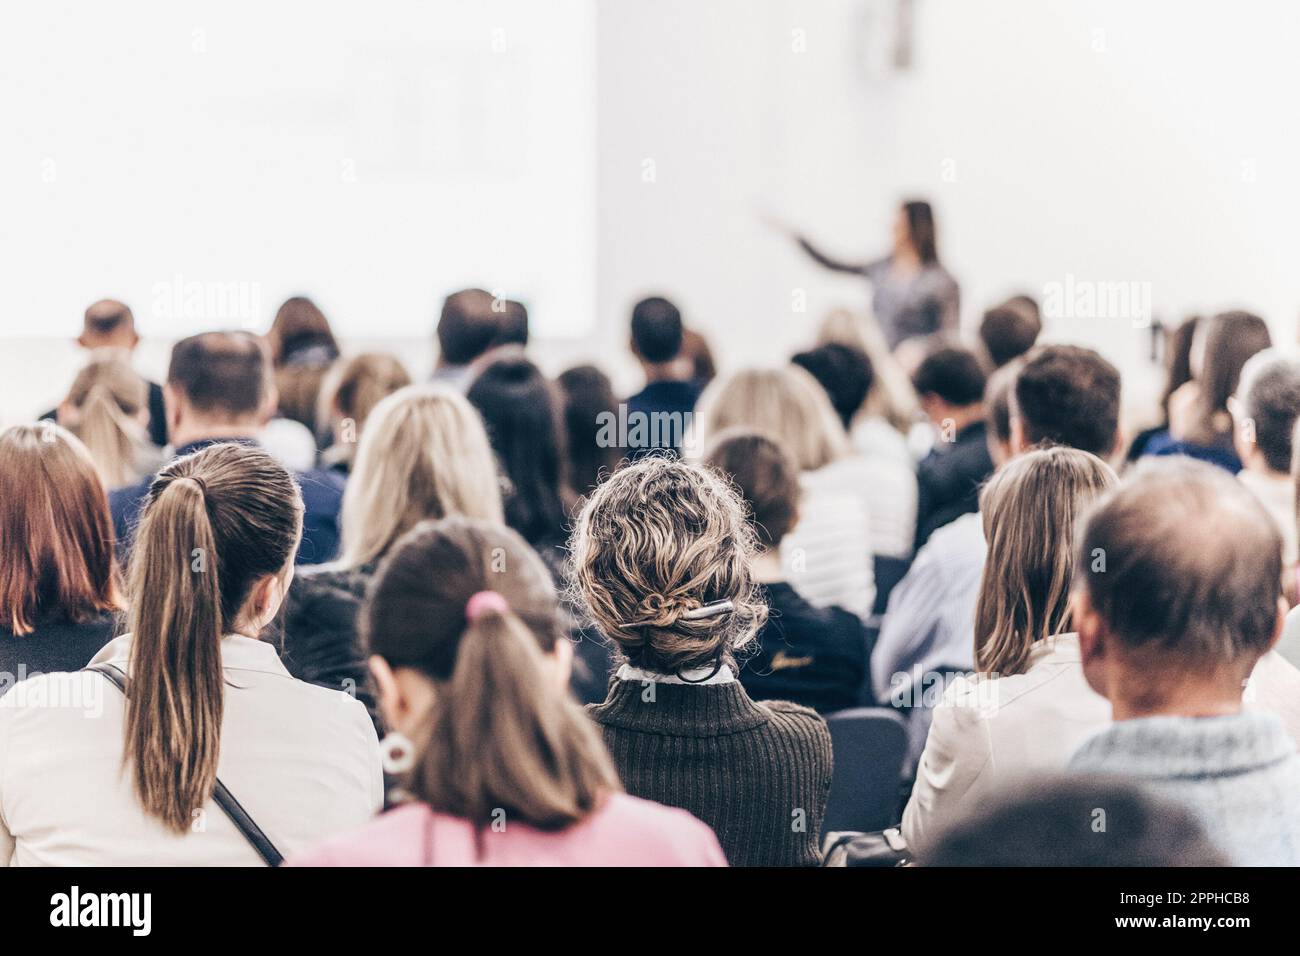 Female speaker giving a talk at business meeting. Audience in conference hall. Business and entrepreneurship symposium. Stock Photo